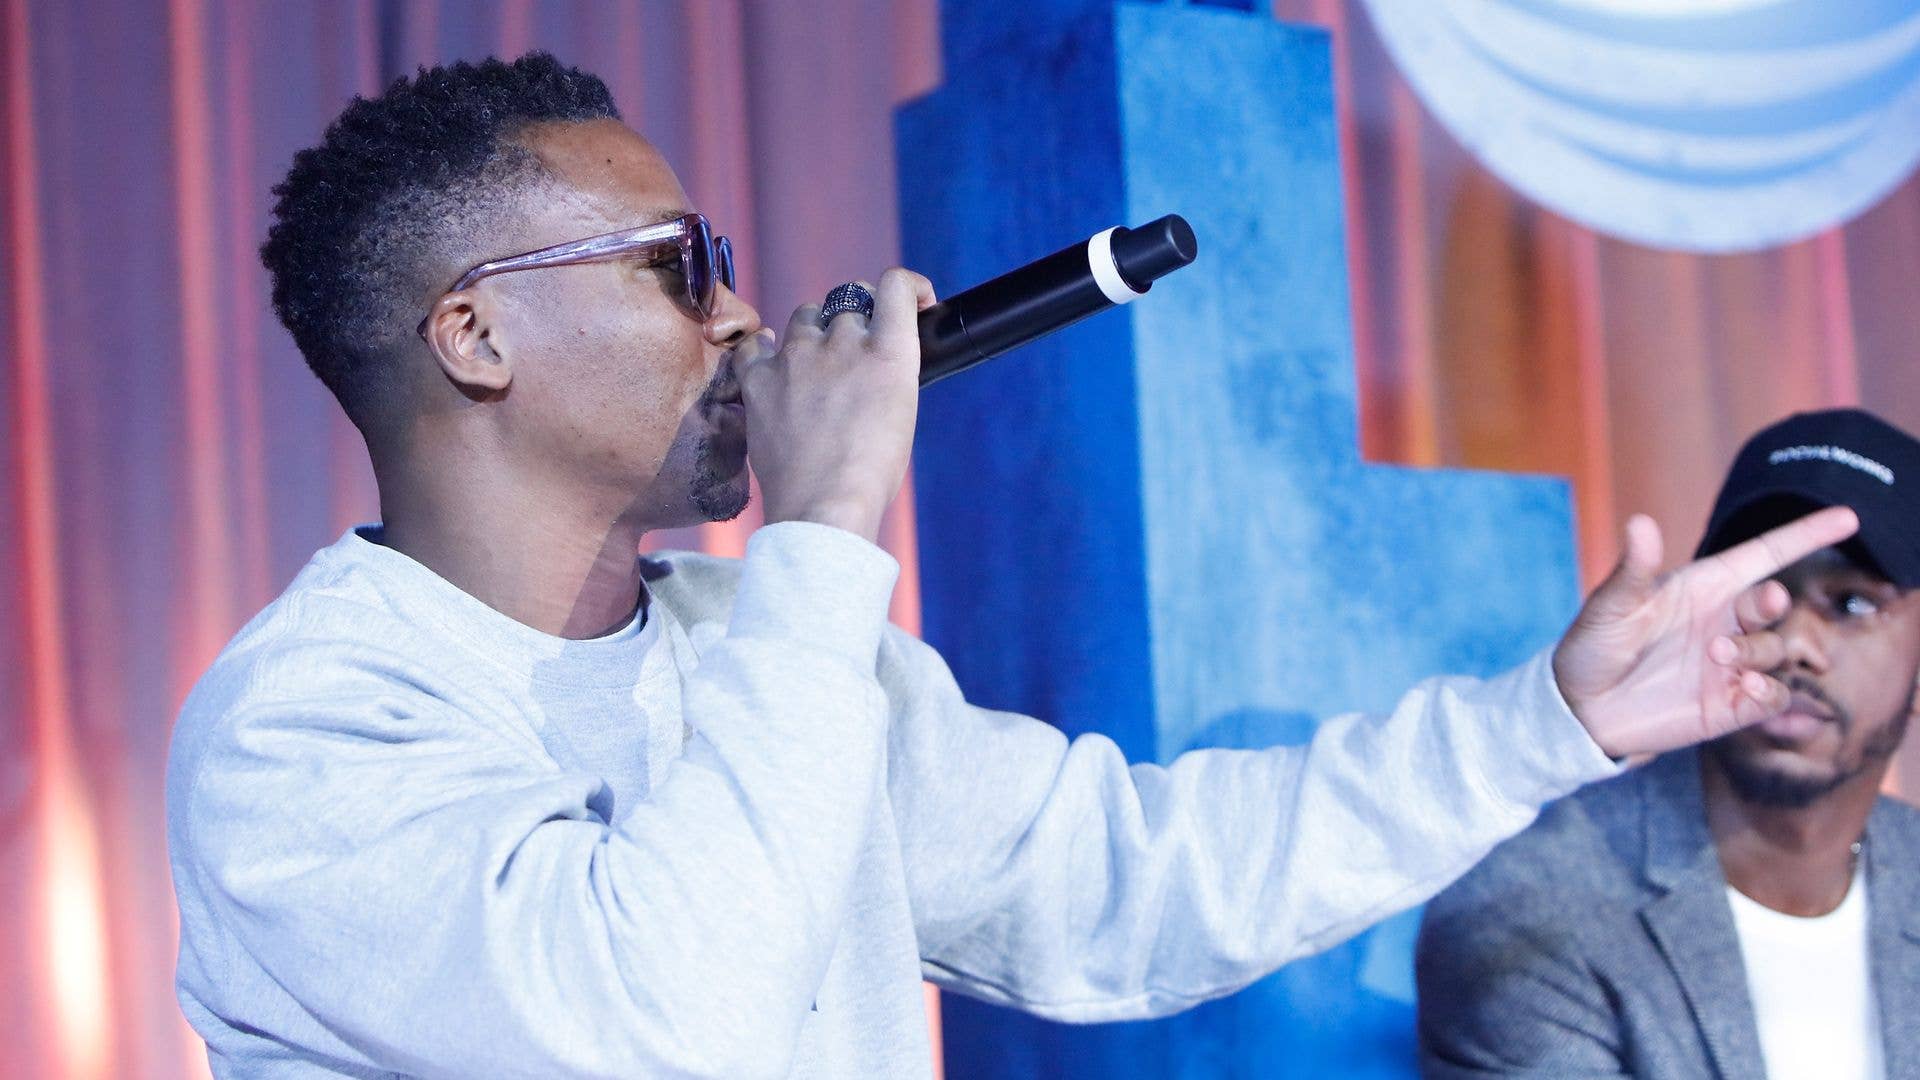 Lupe Fiasco photographed on stage